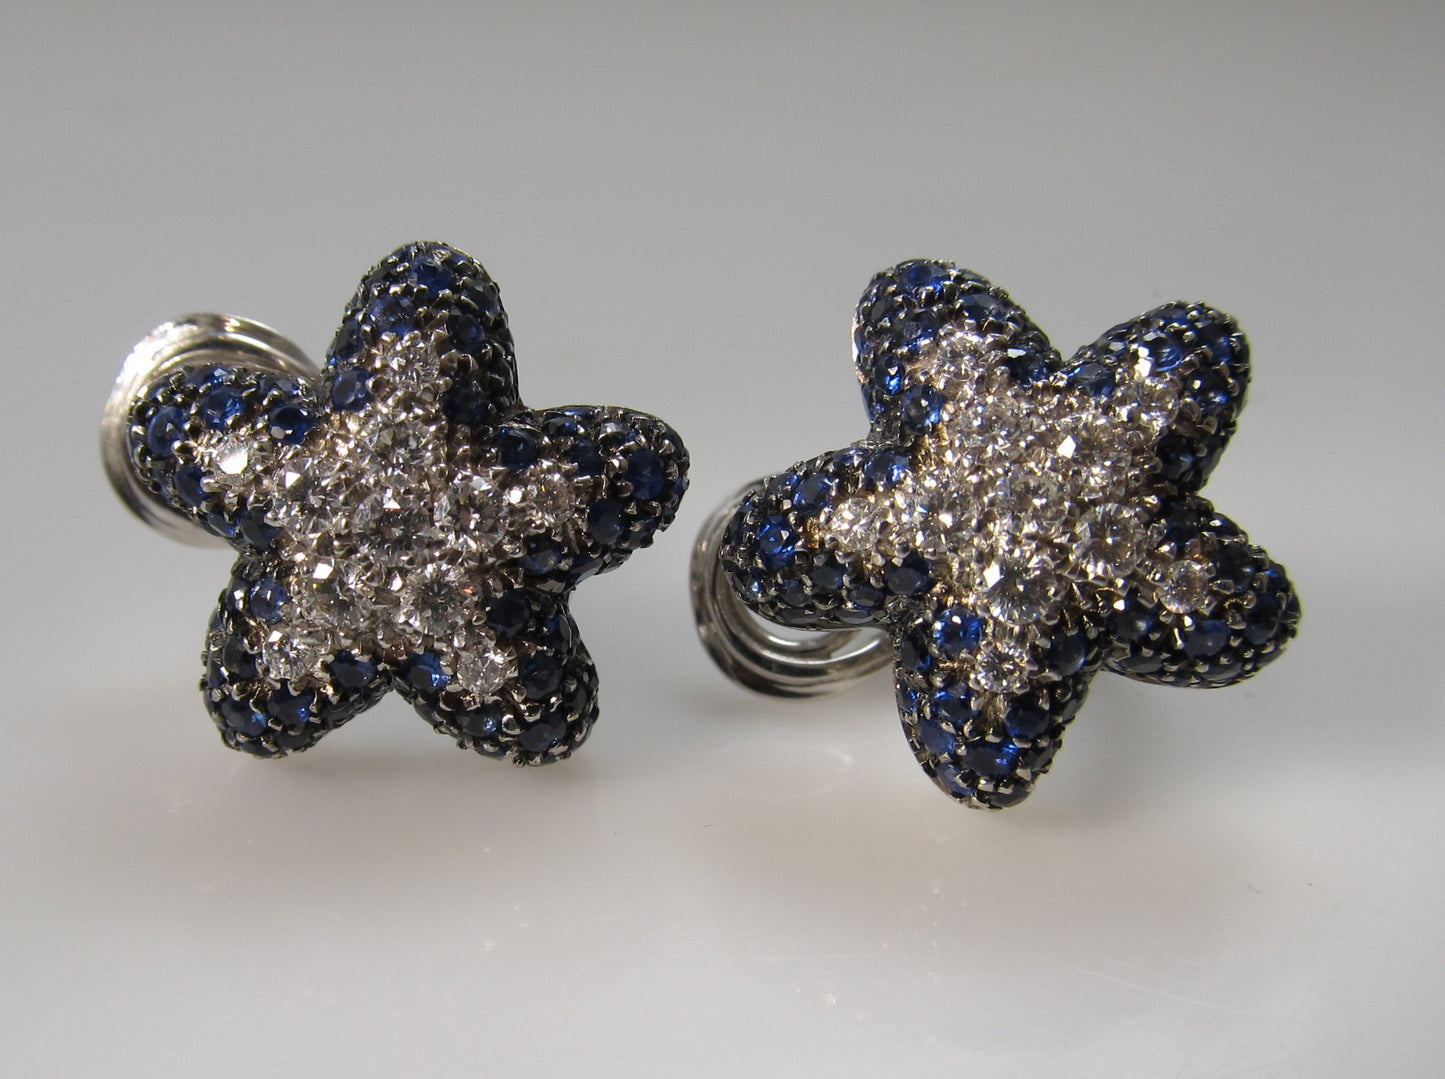 18k white gold starfish earrings with sapphire and diamonds